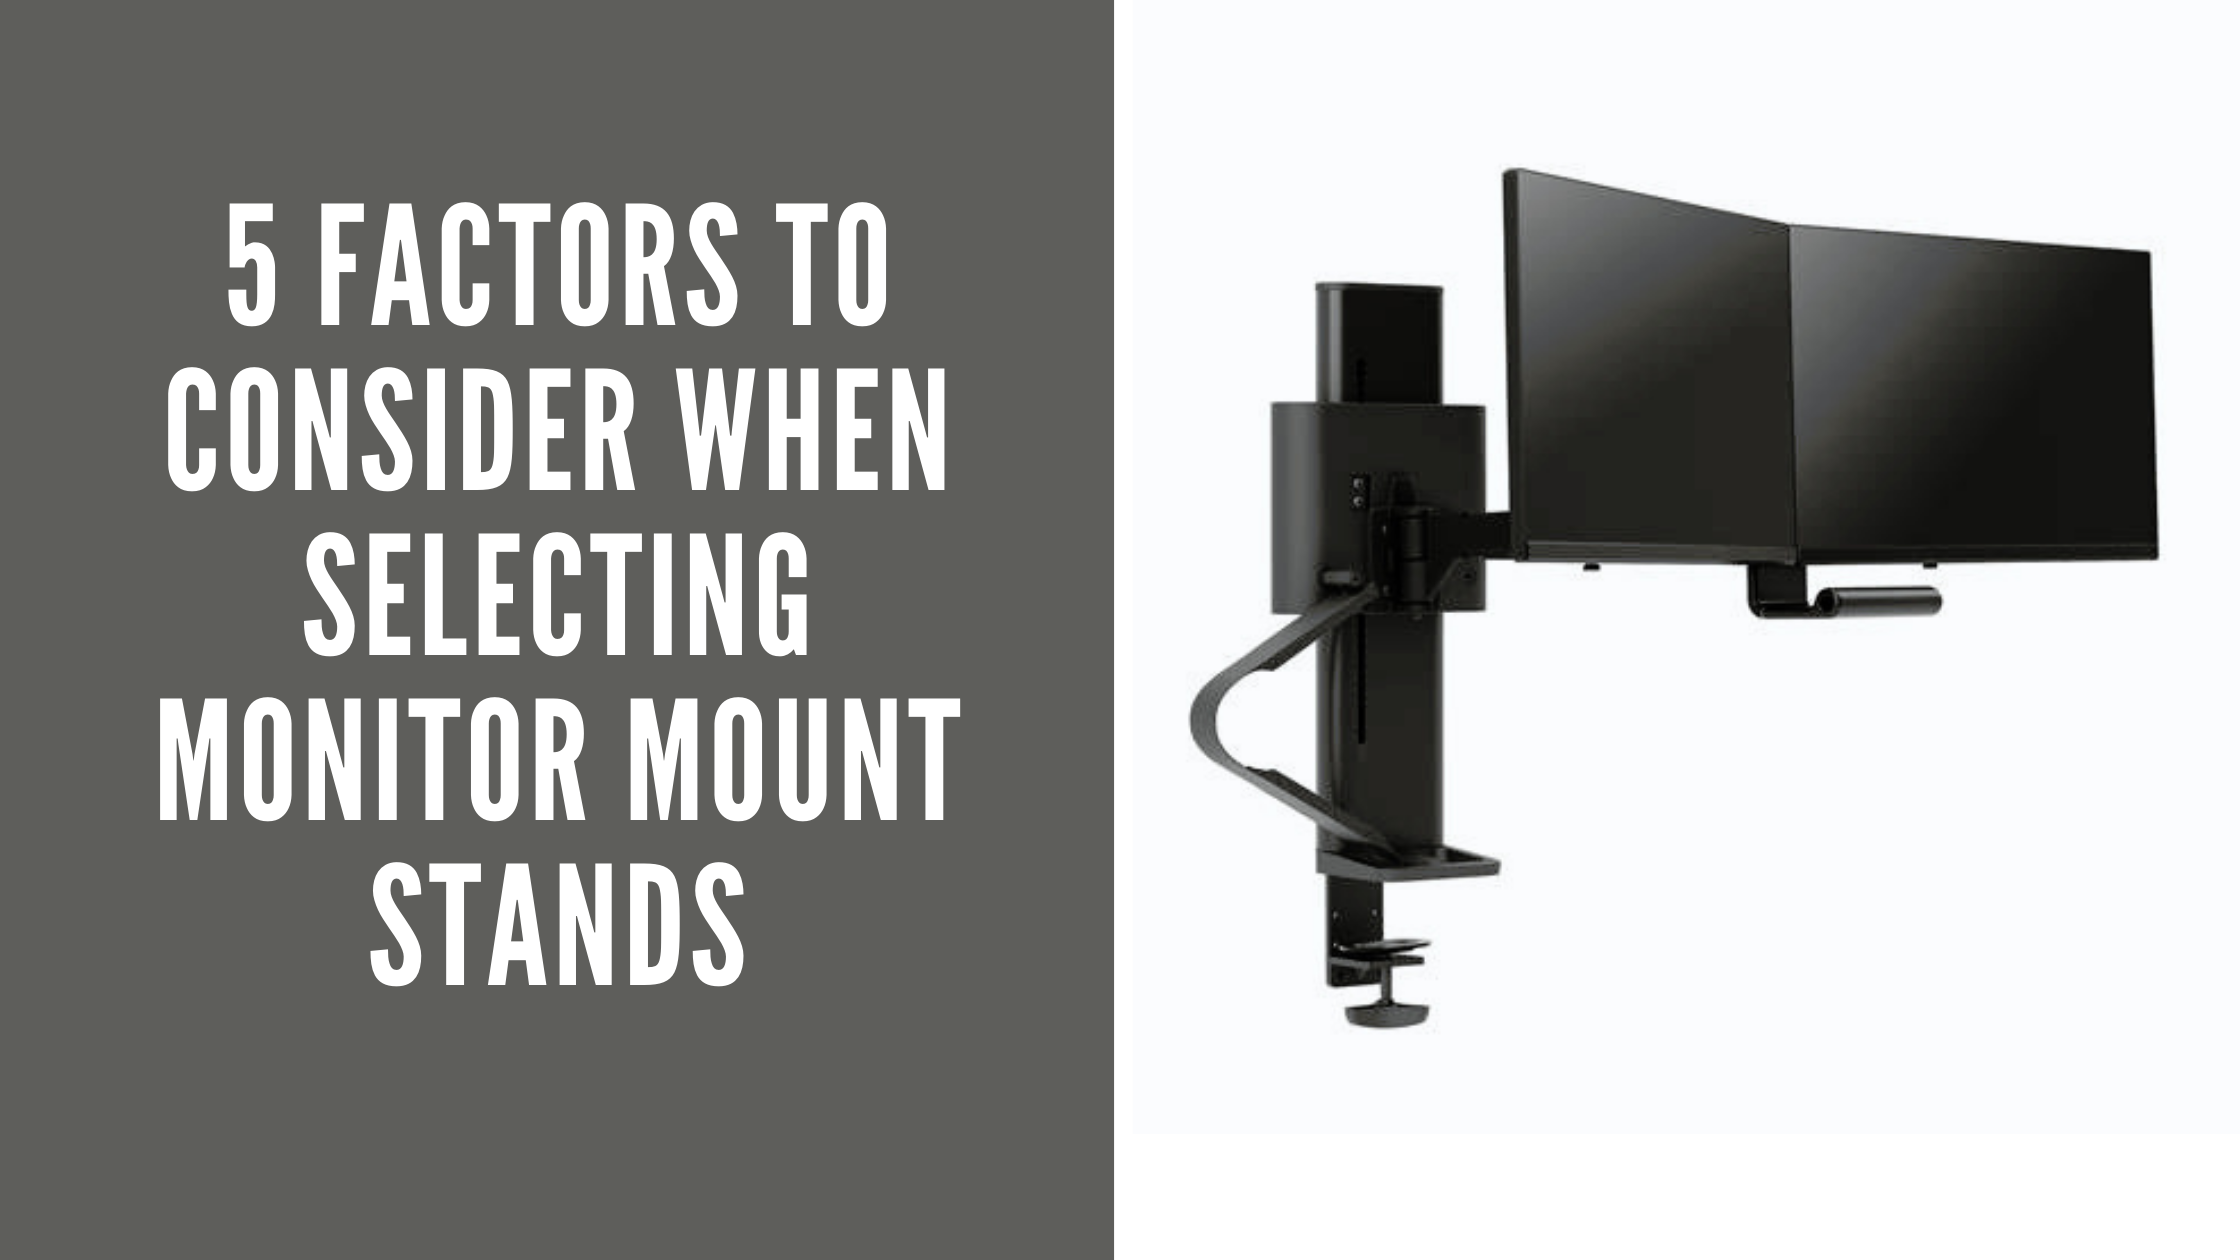 Five Factors to Consider When Selecting Monitor Mounts Stands 